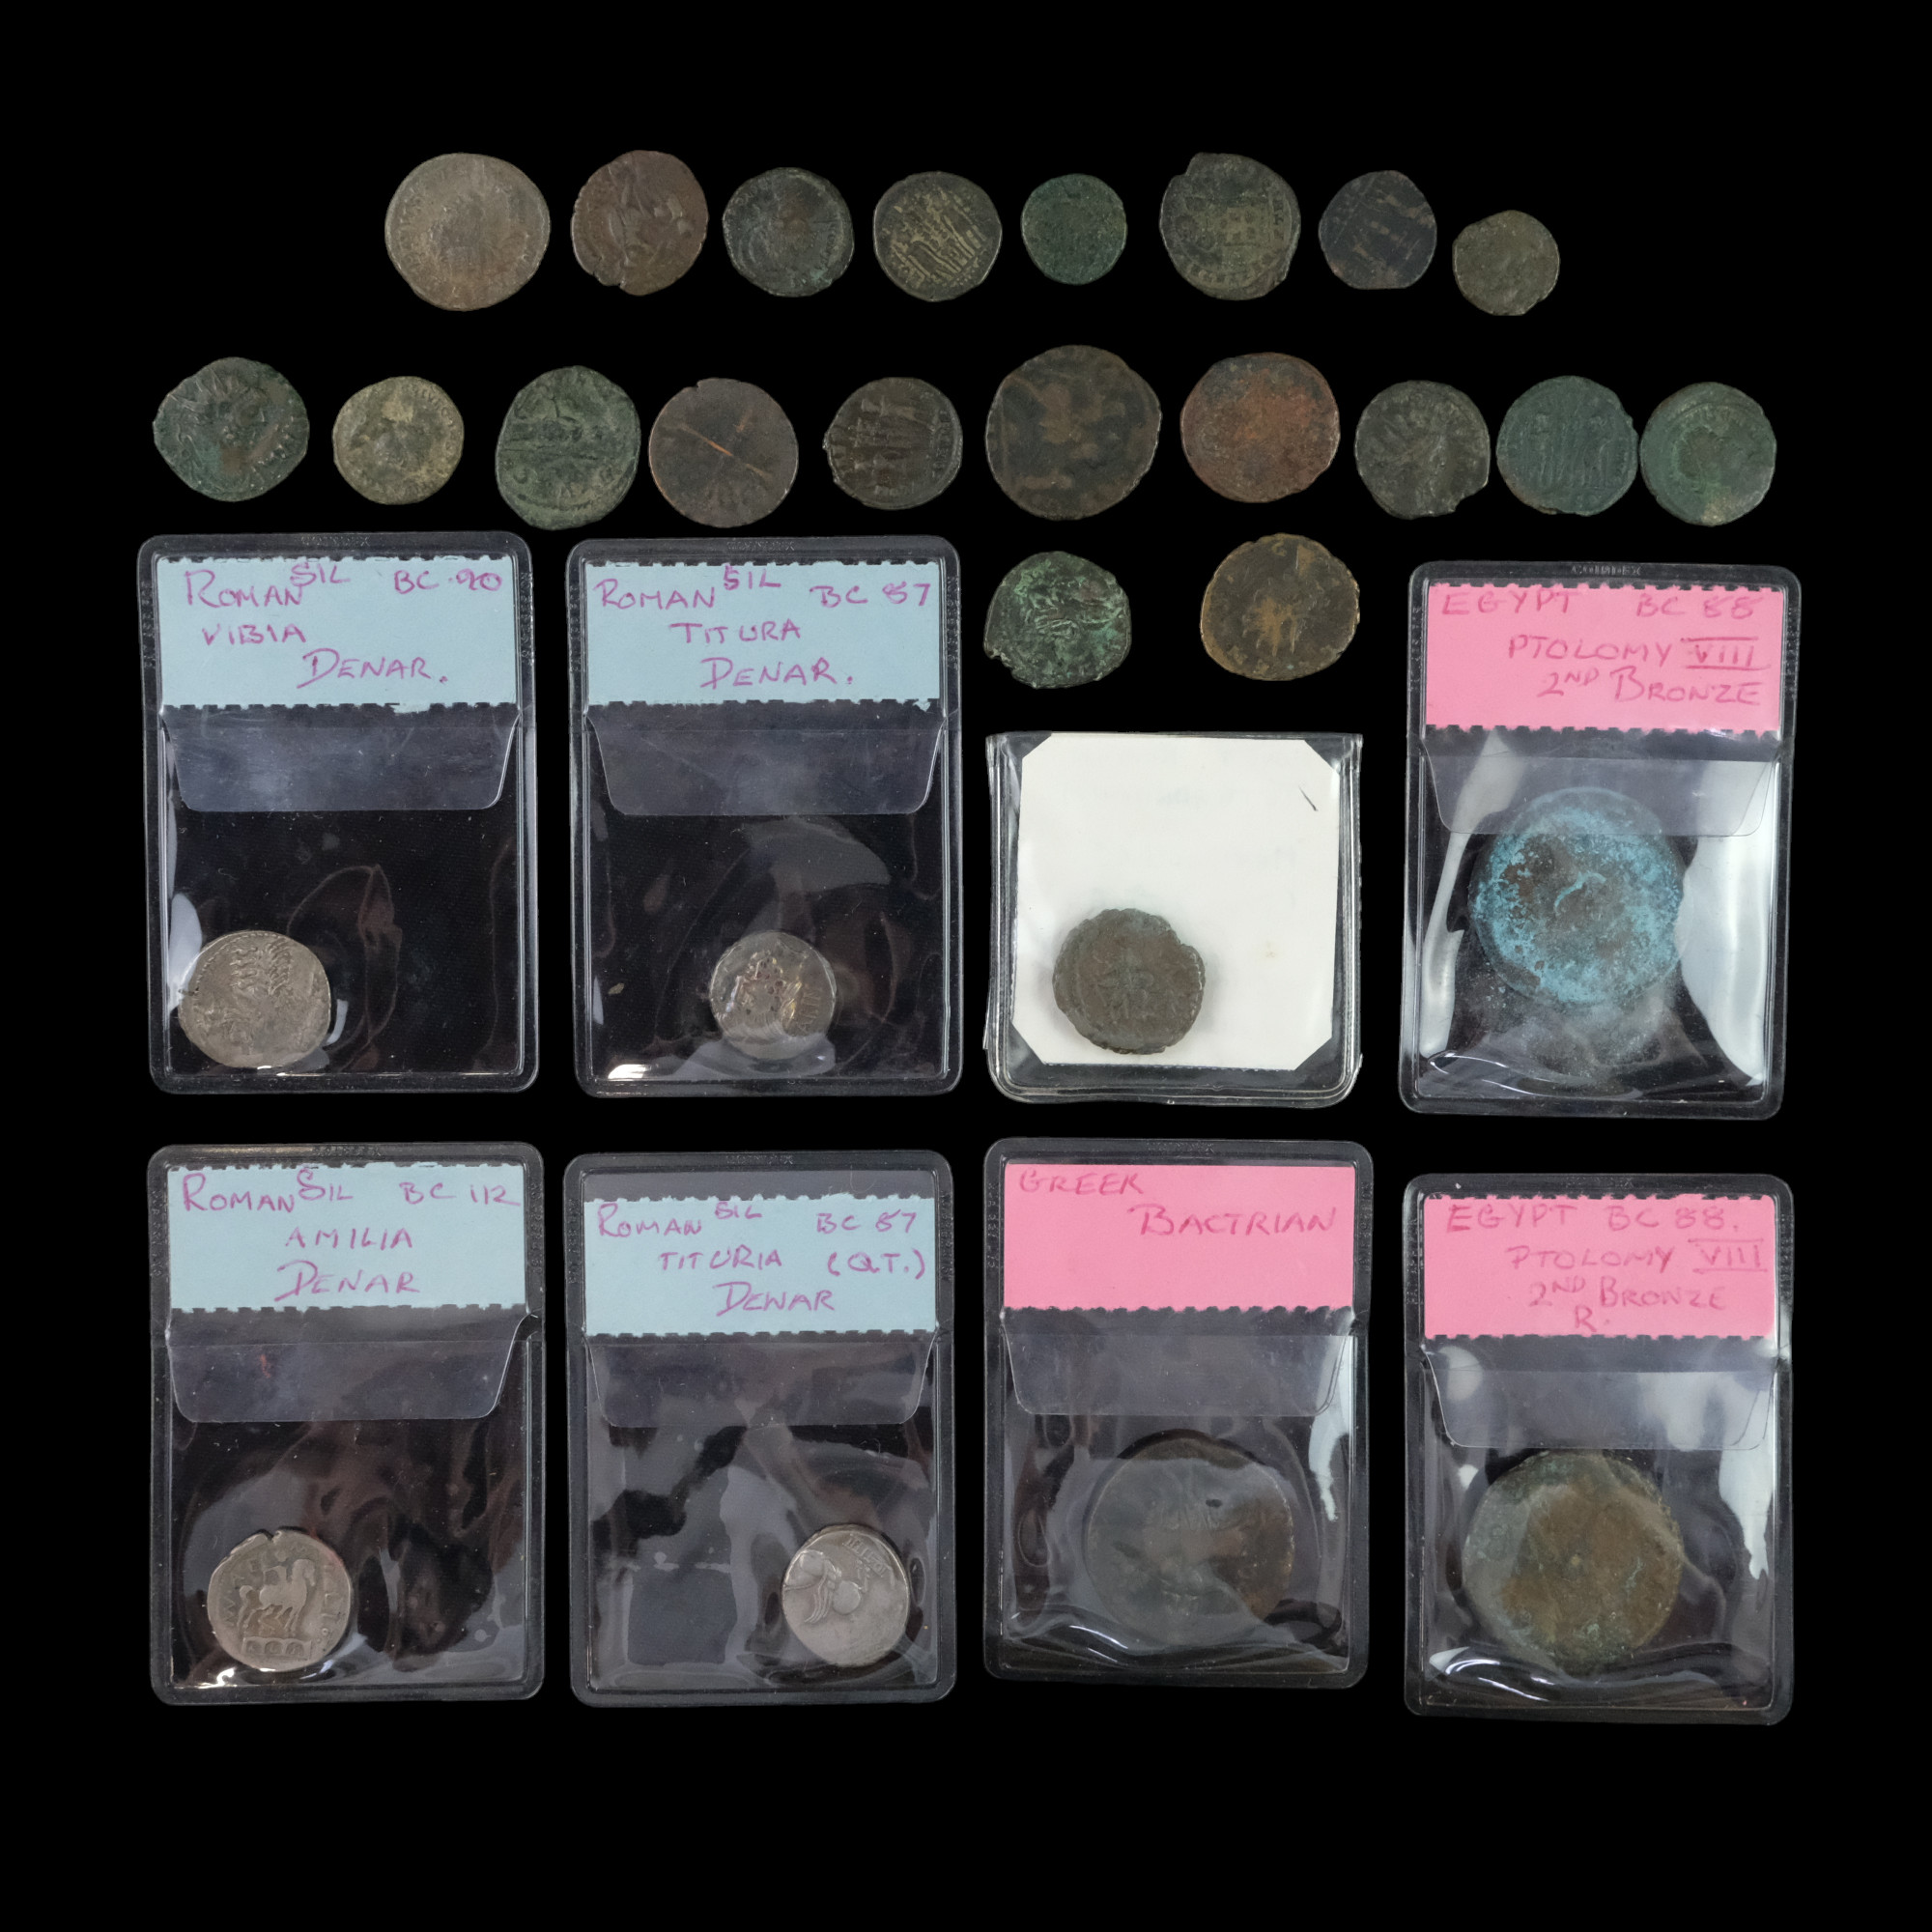 A collection of Classical / ancient coins including Roman, Egyptian and Greek